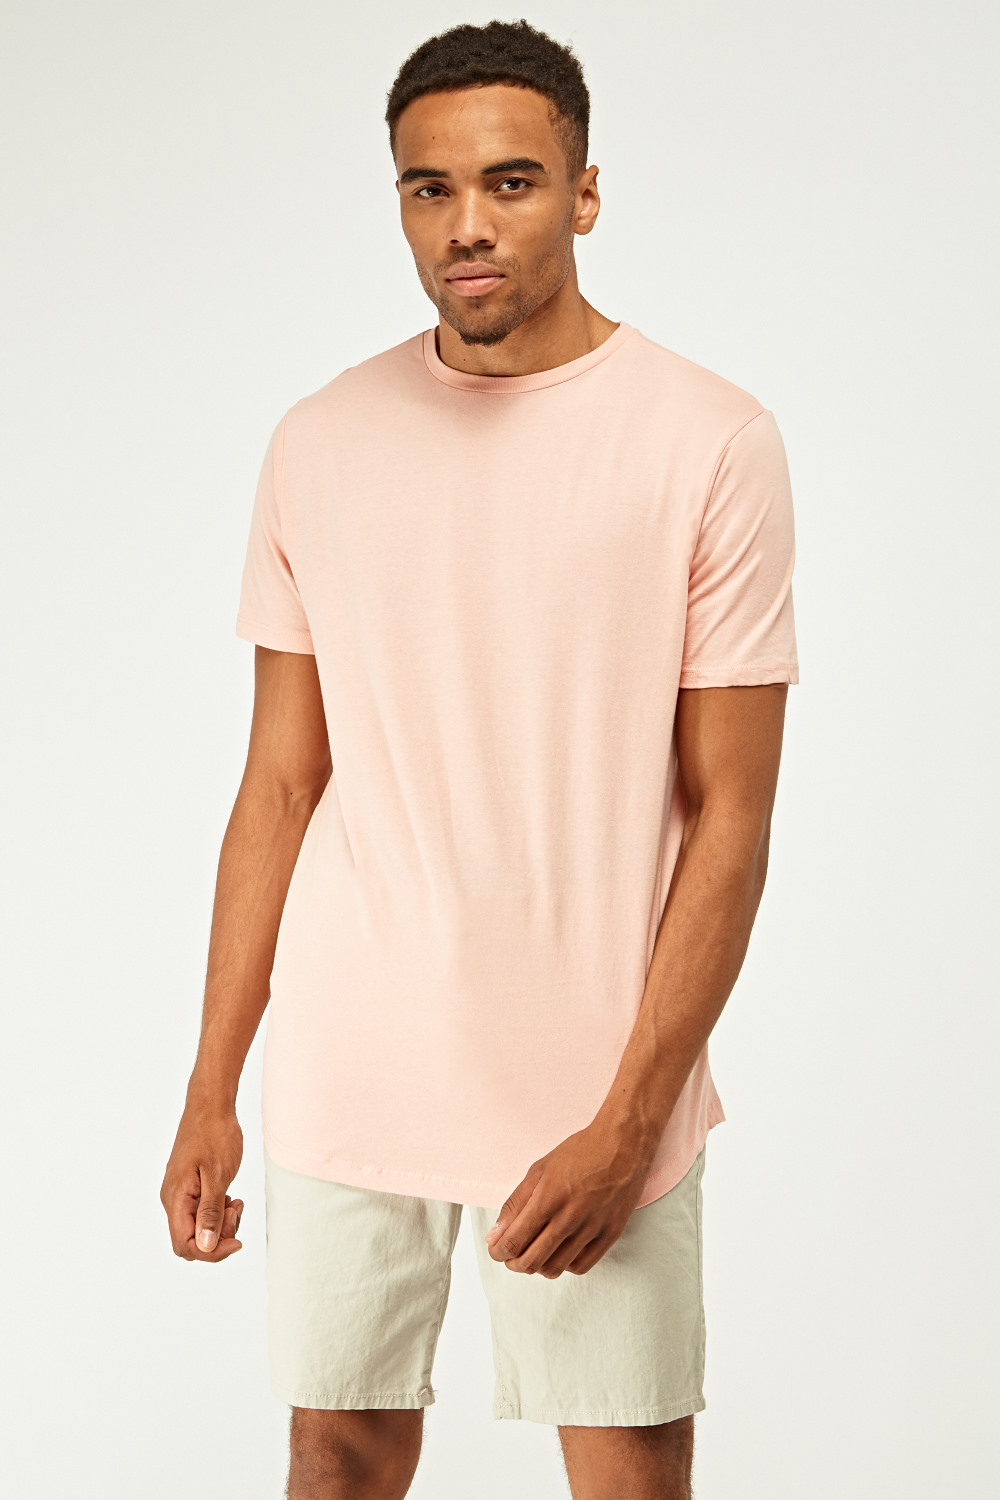 Long Line Fit Casual T-Shirt - Just $3